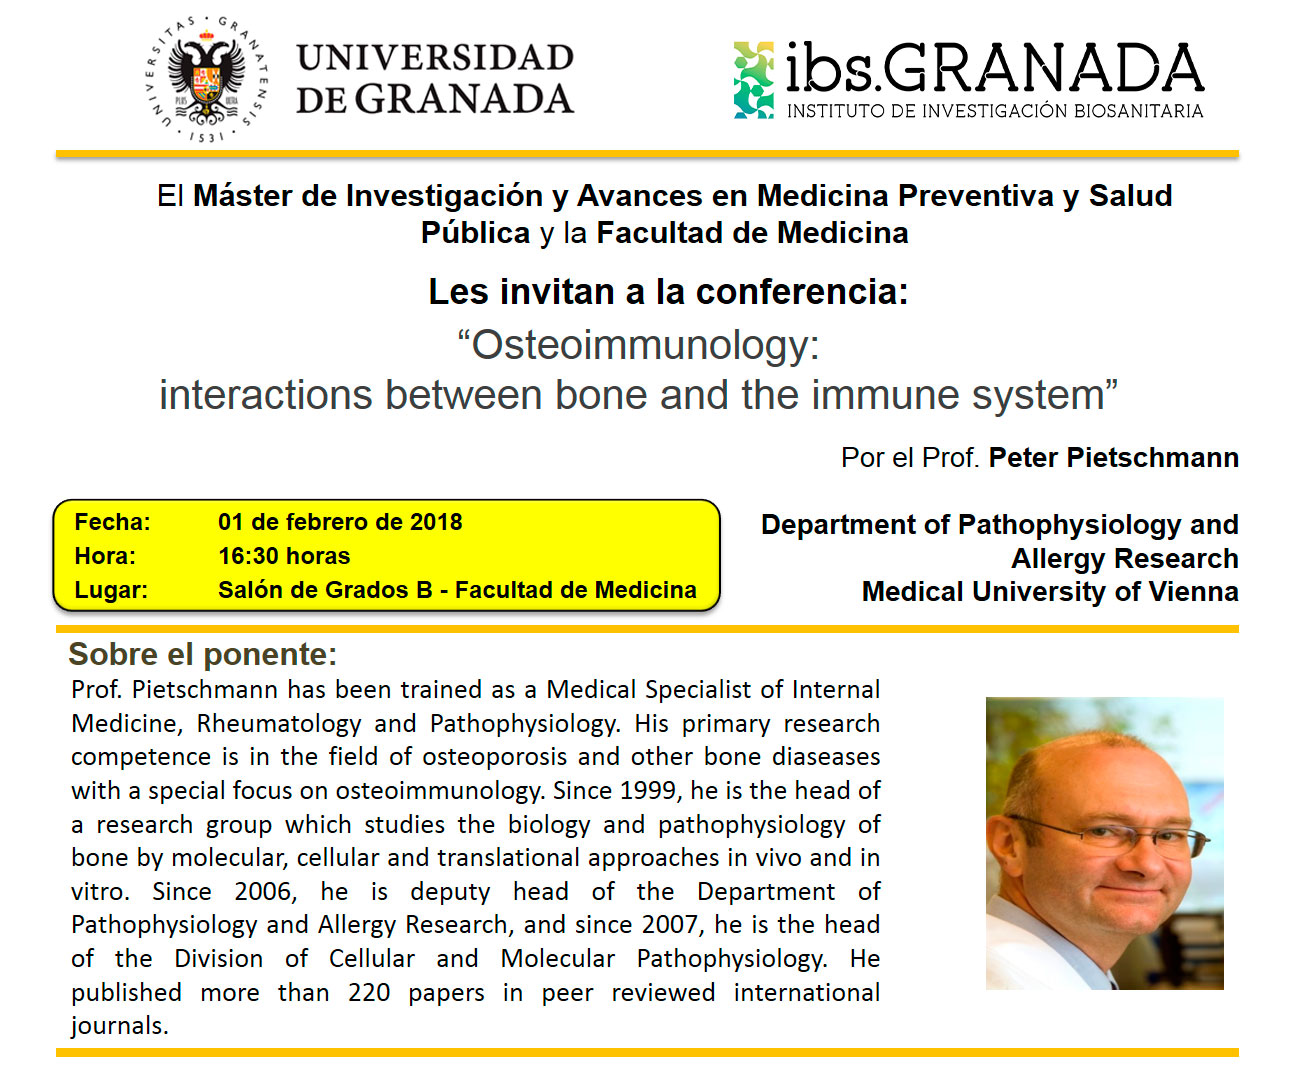 Osteoimmunology conference: interactions between bone and the immune system”